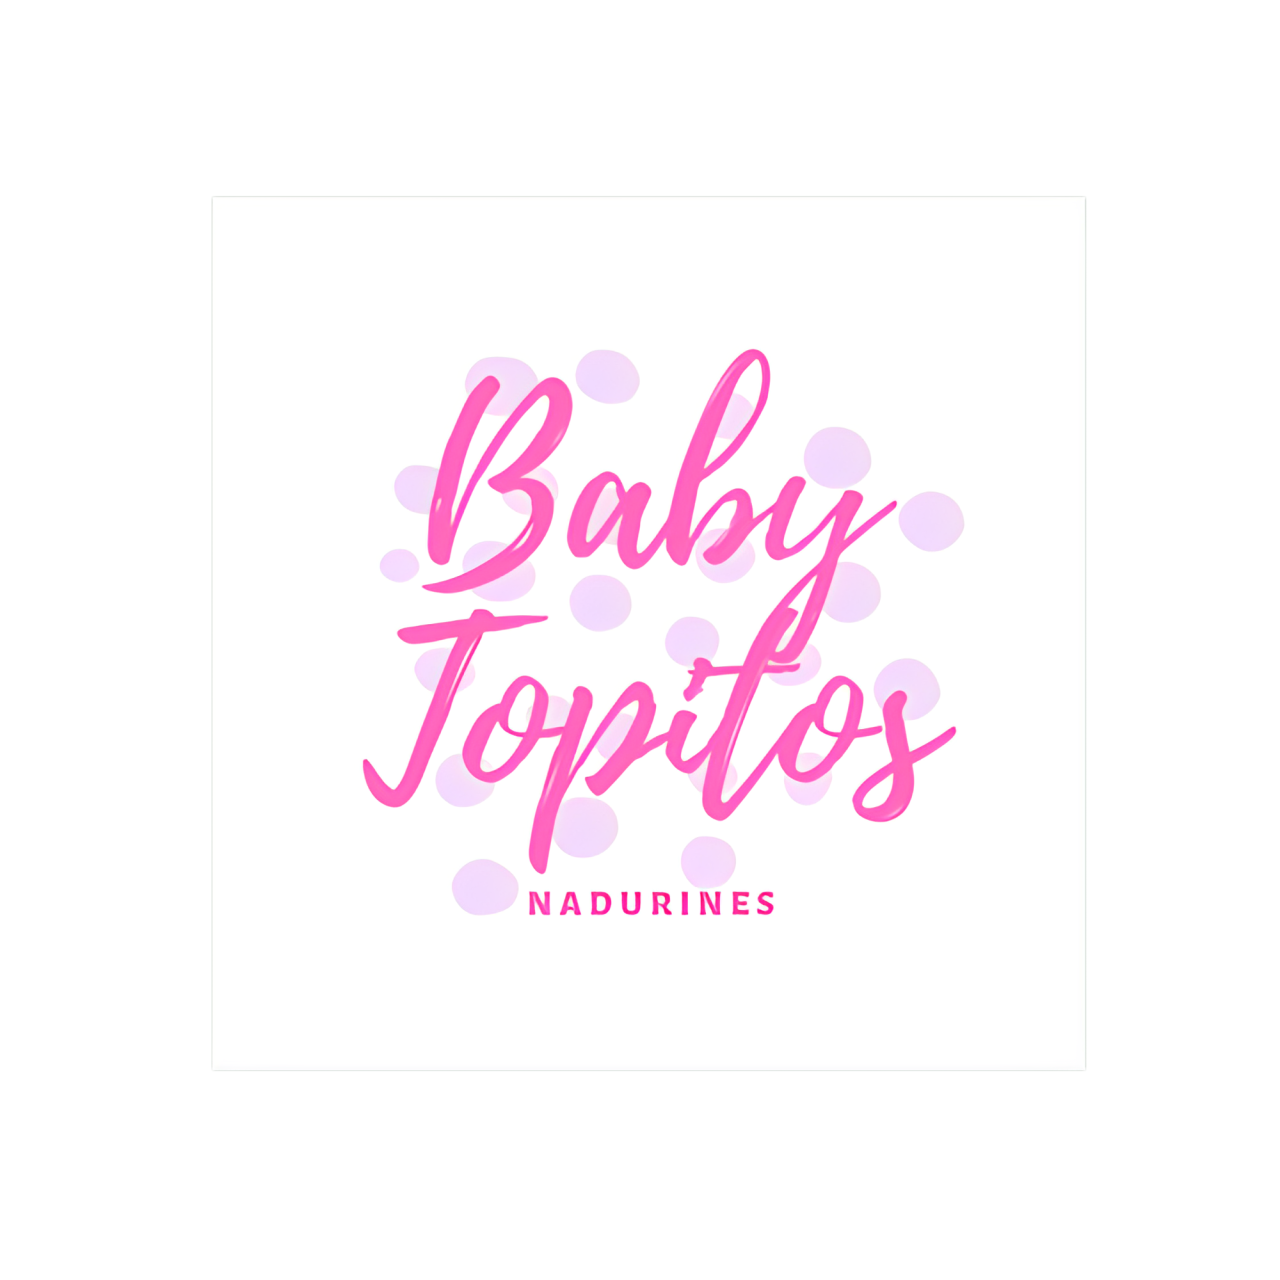 "Baby Topitos" doll dress 